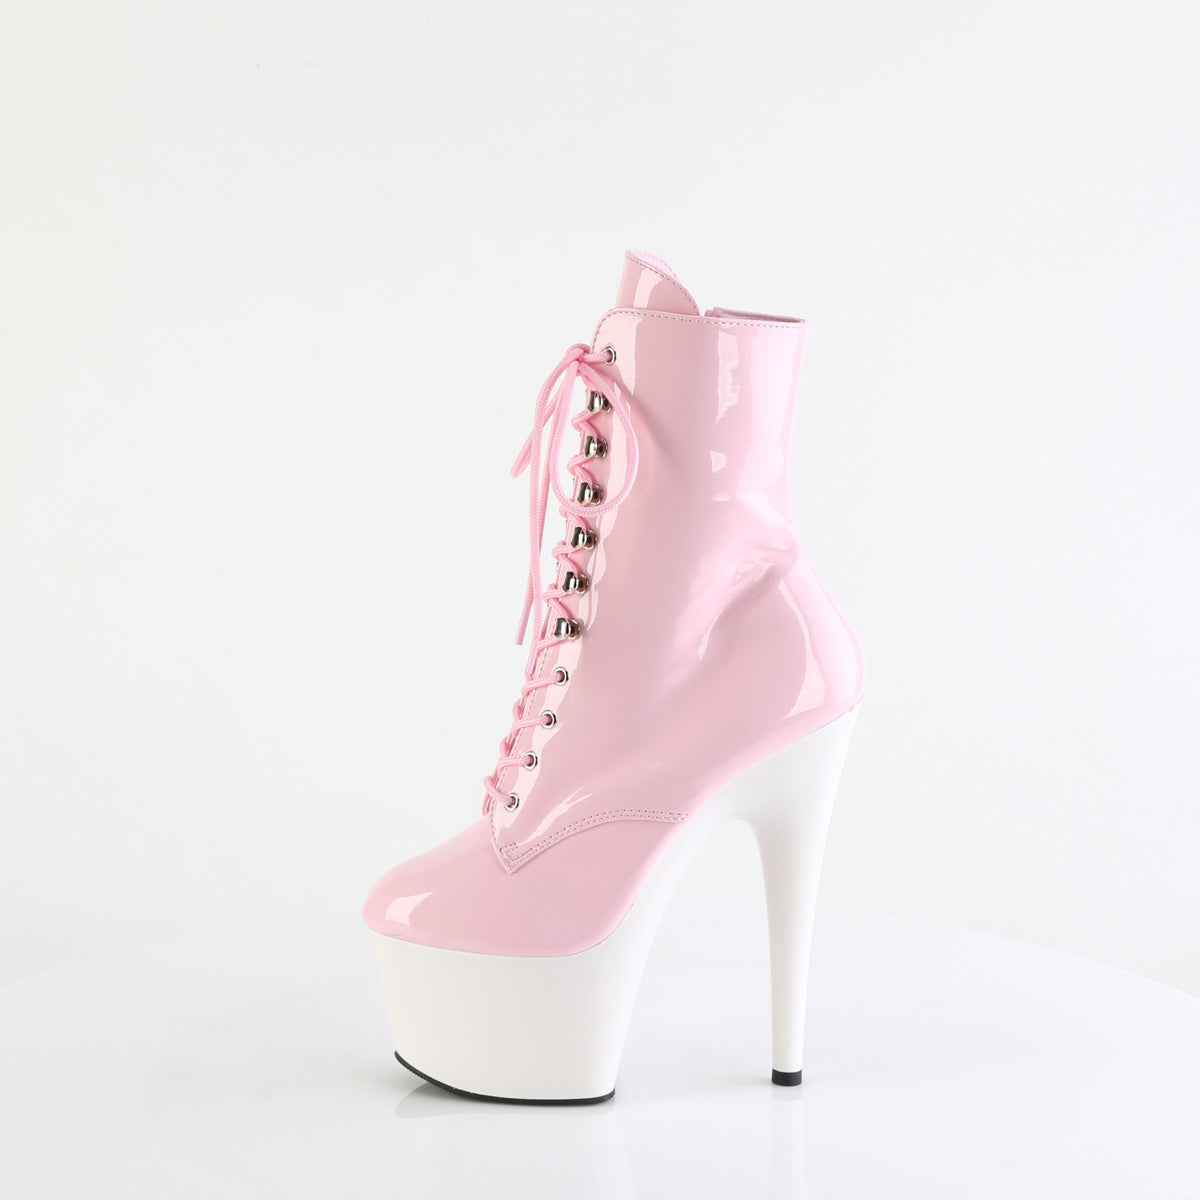 ADORE-1020 Pink & White Calf High Boots  Multi view 4